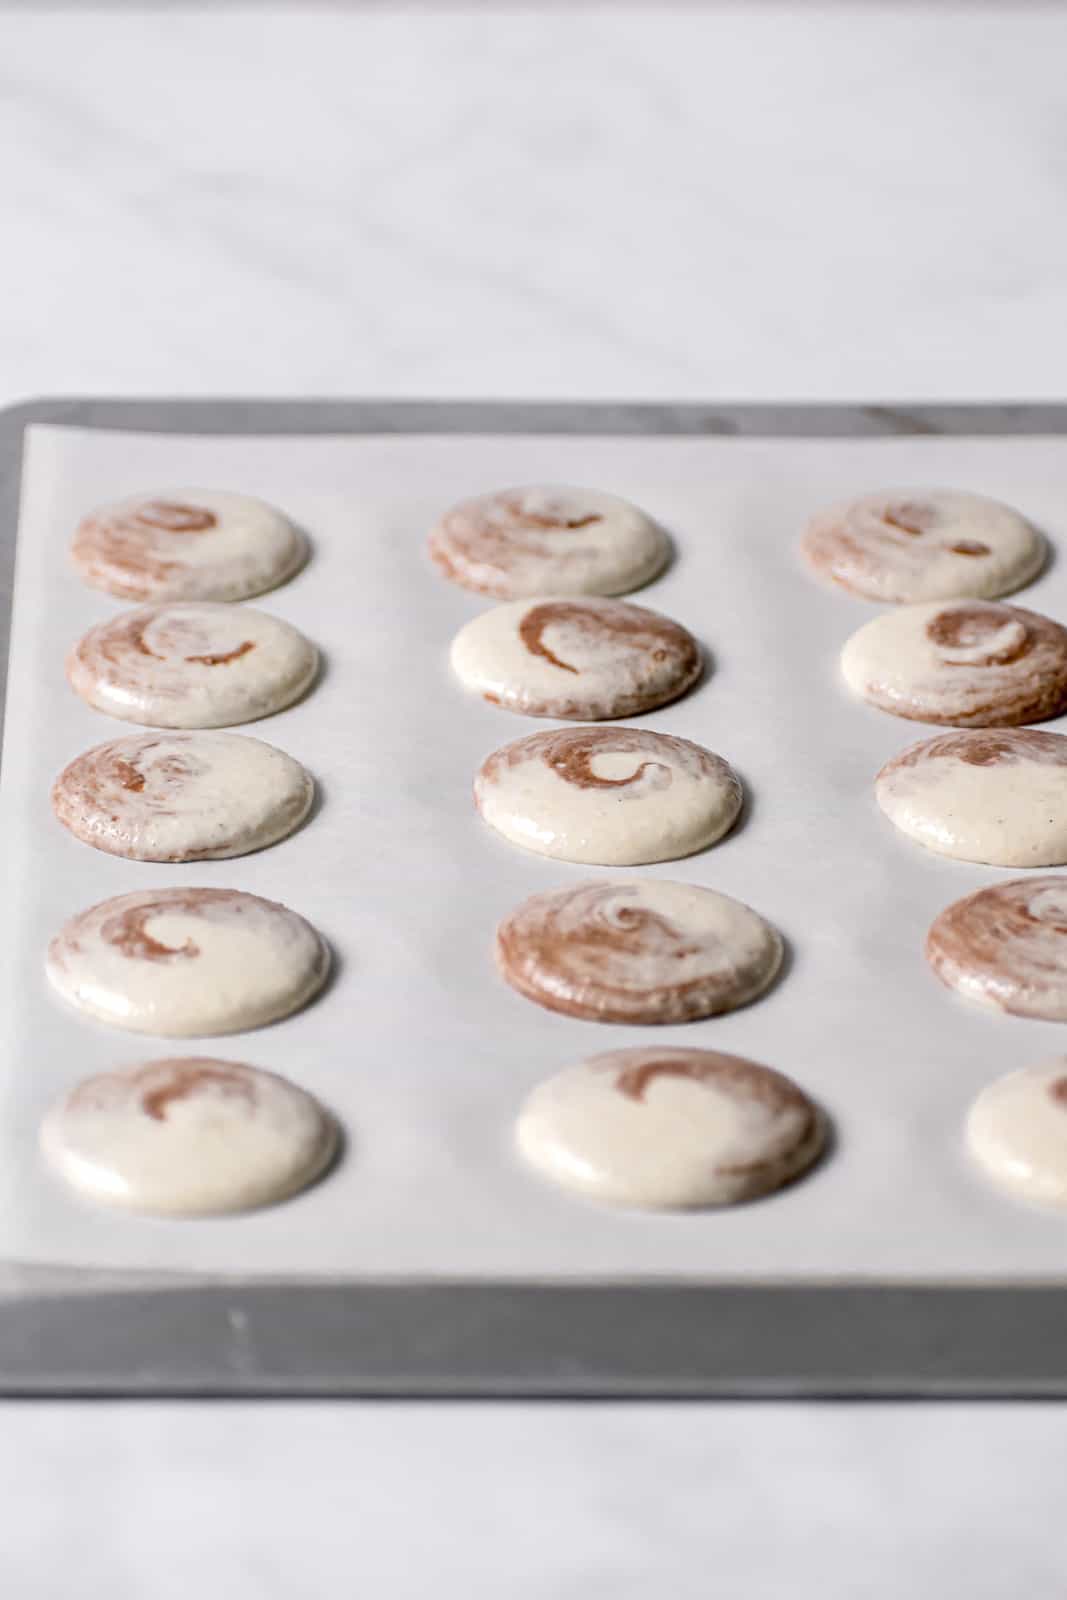 unbaked macarons on parchment lined baking sheet.